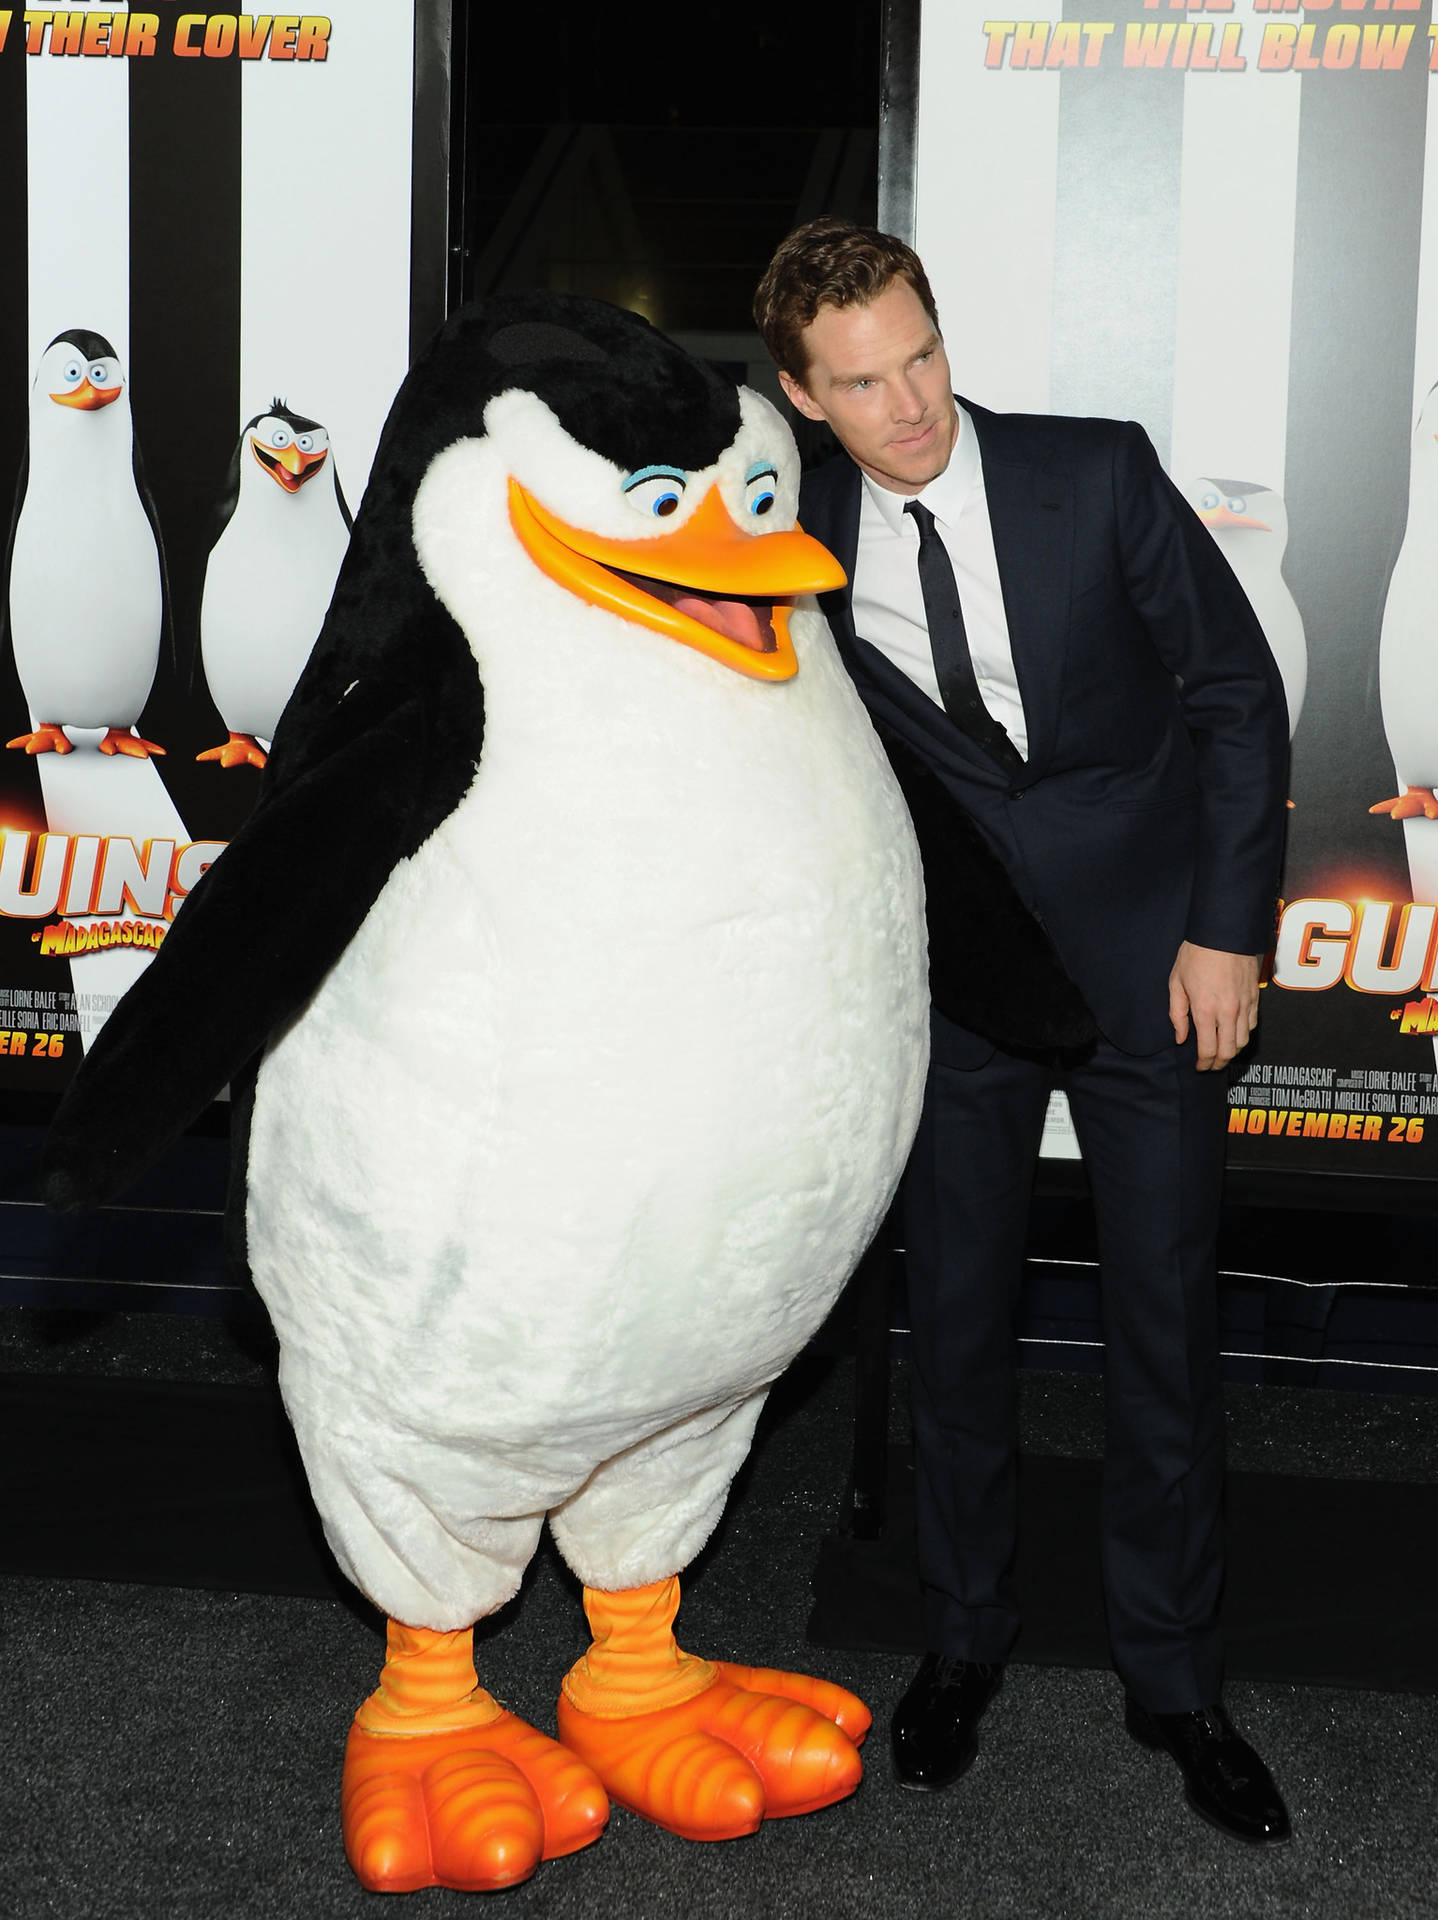 Penguins On An Adventure: The Penguins Of Madagascar